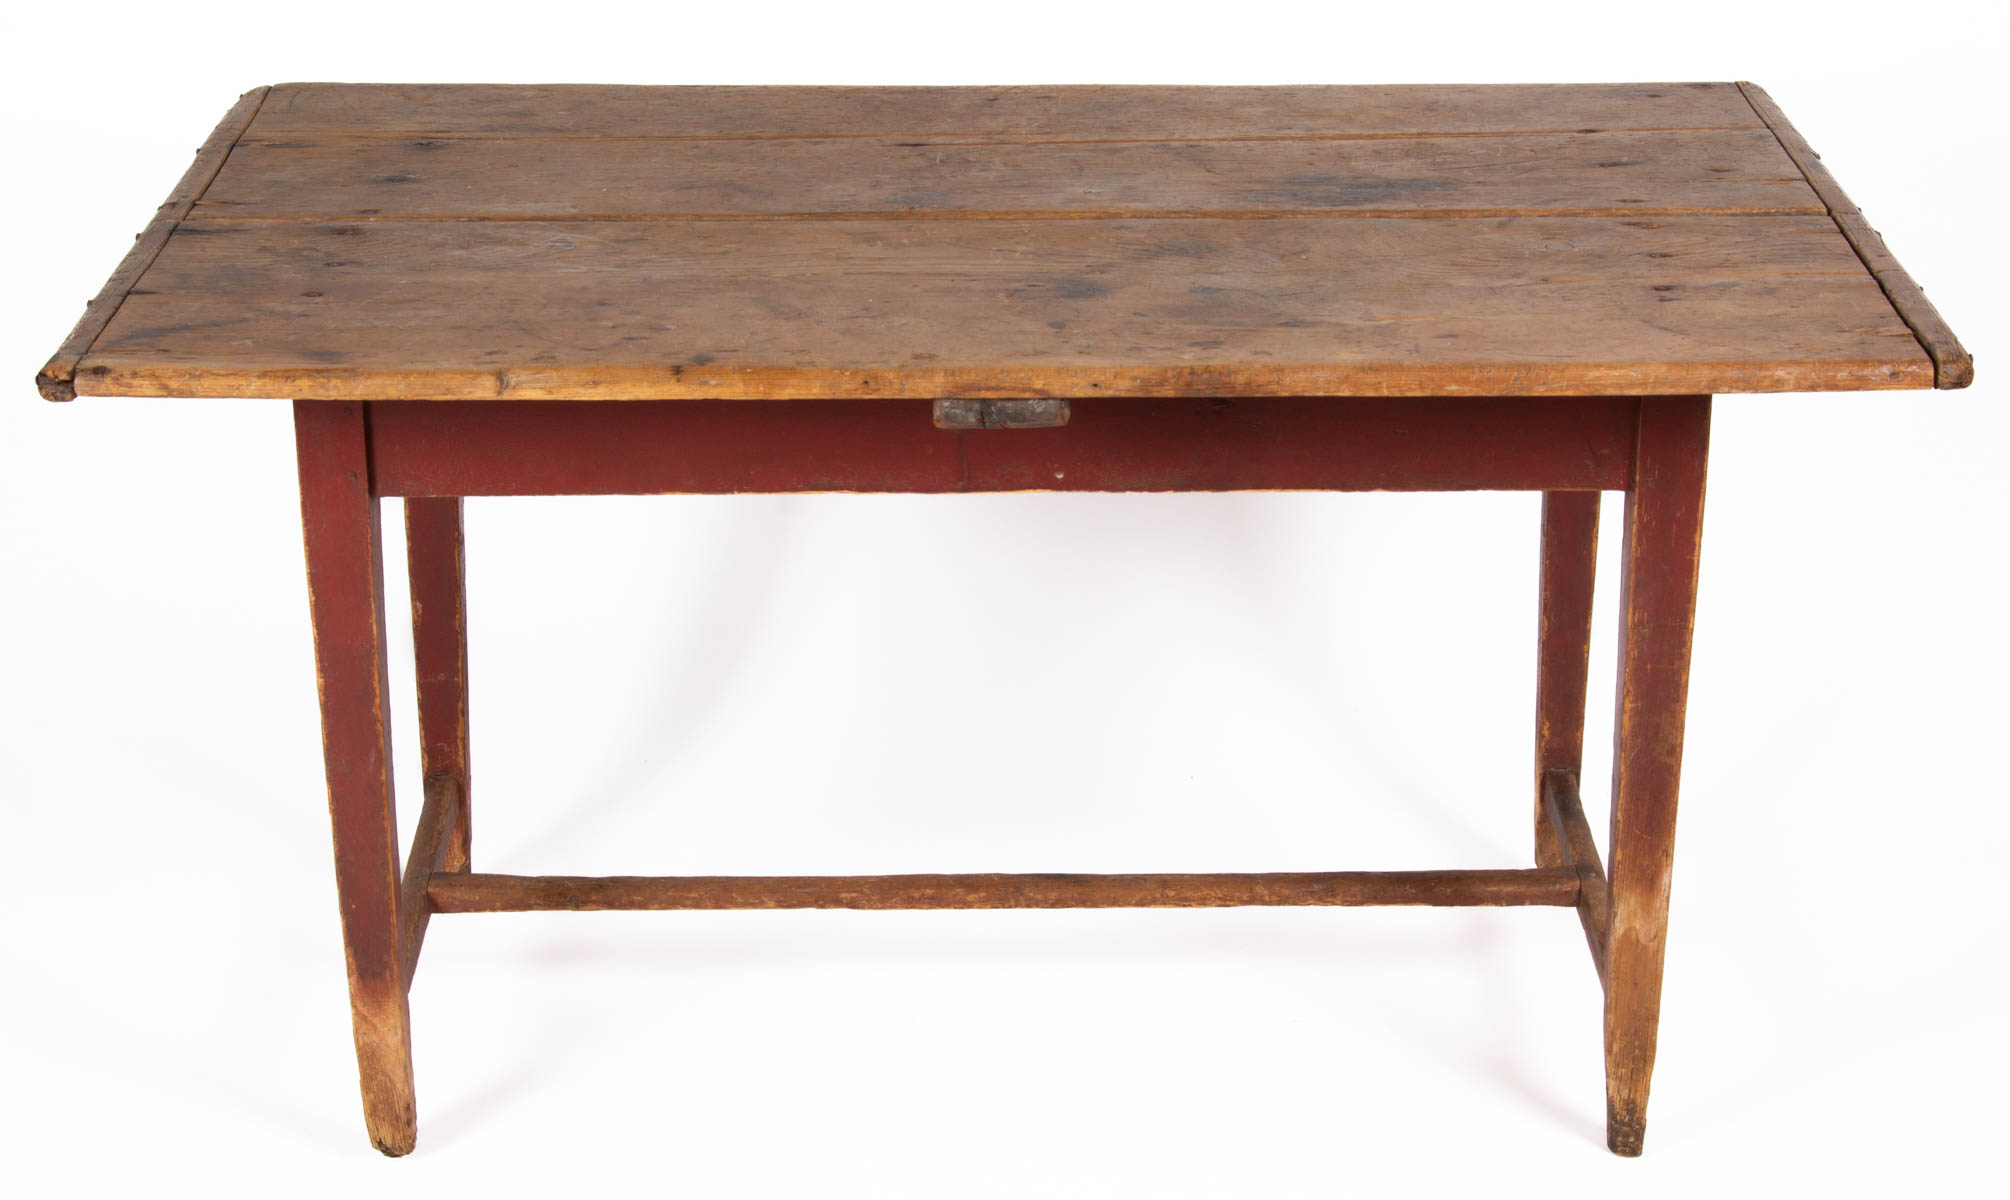 NEW ENGLAND COUNTRY PAINTED PINE FARM TABLE